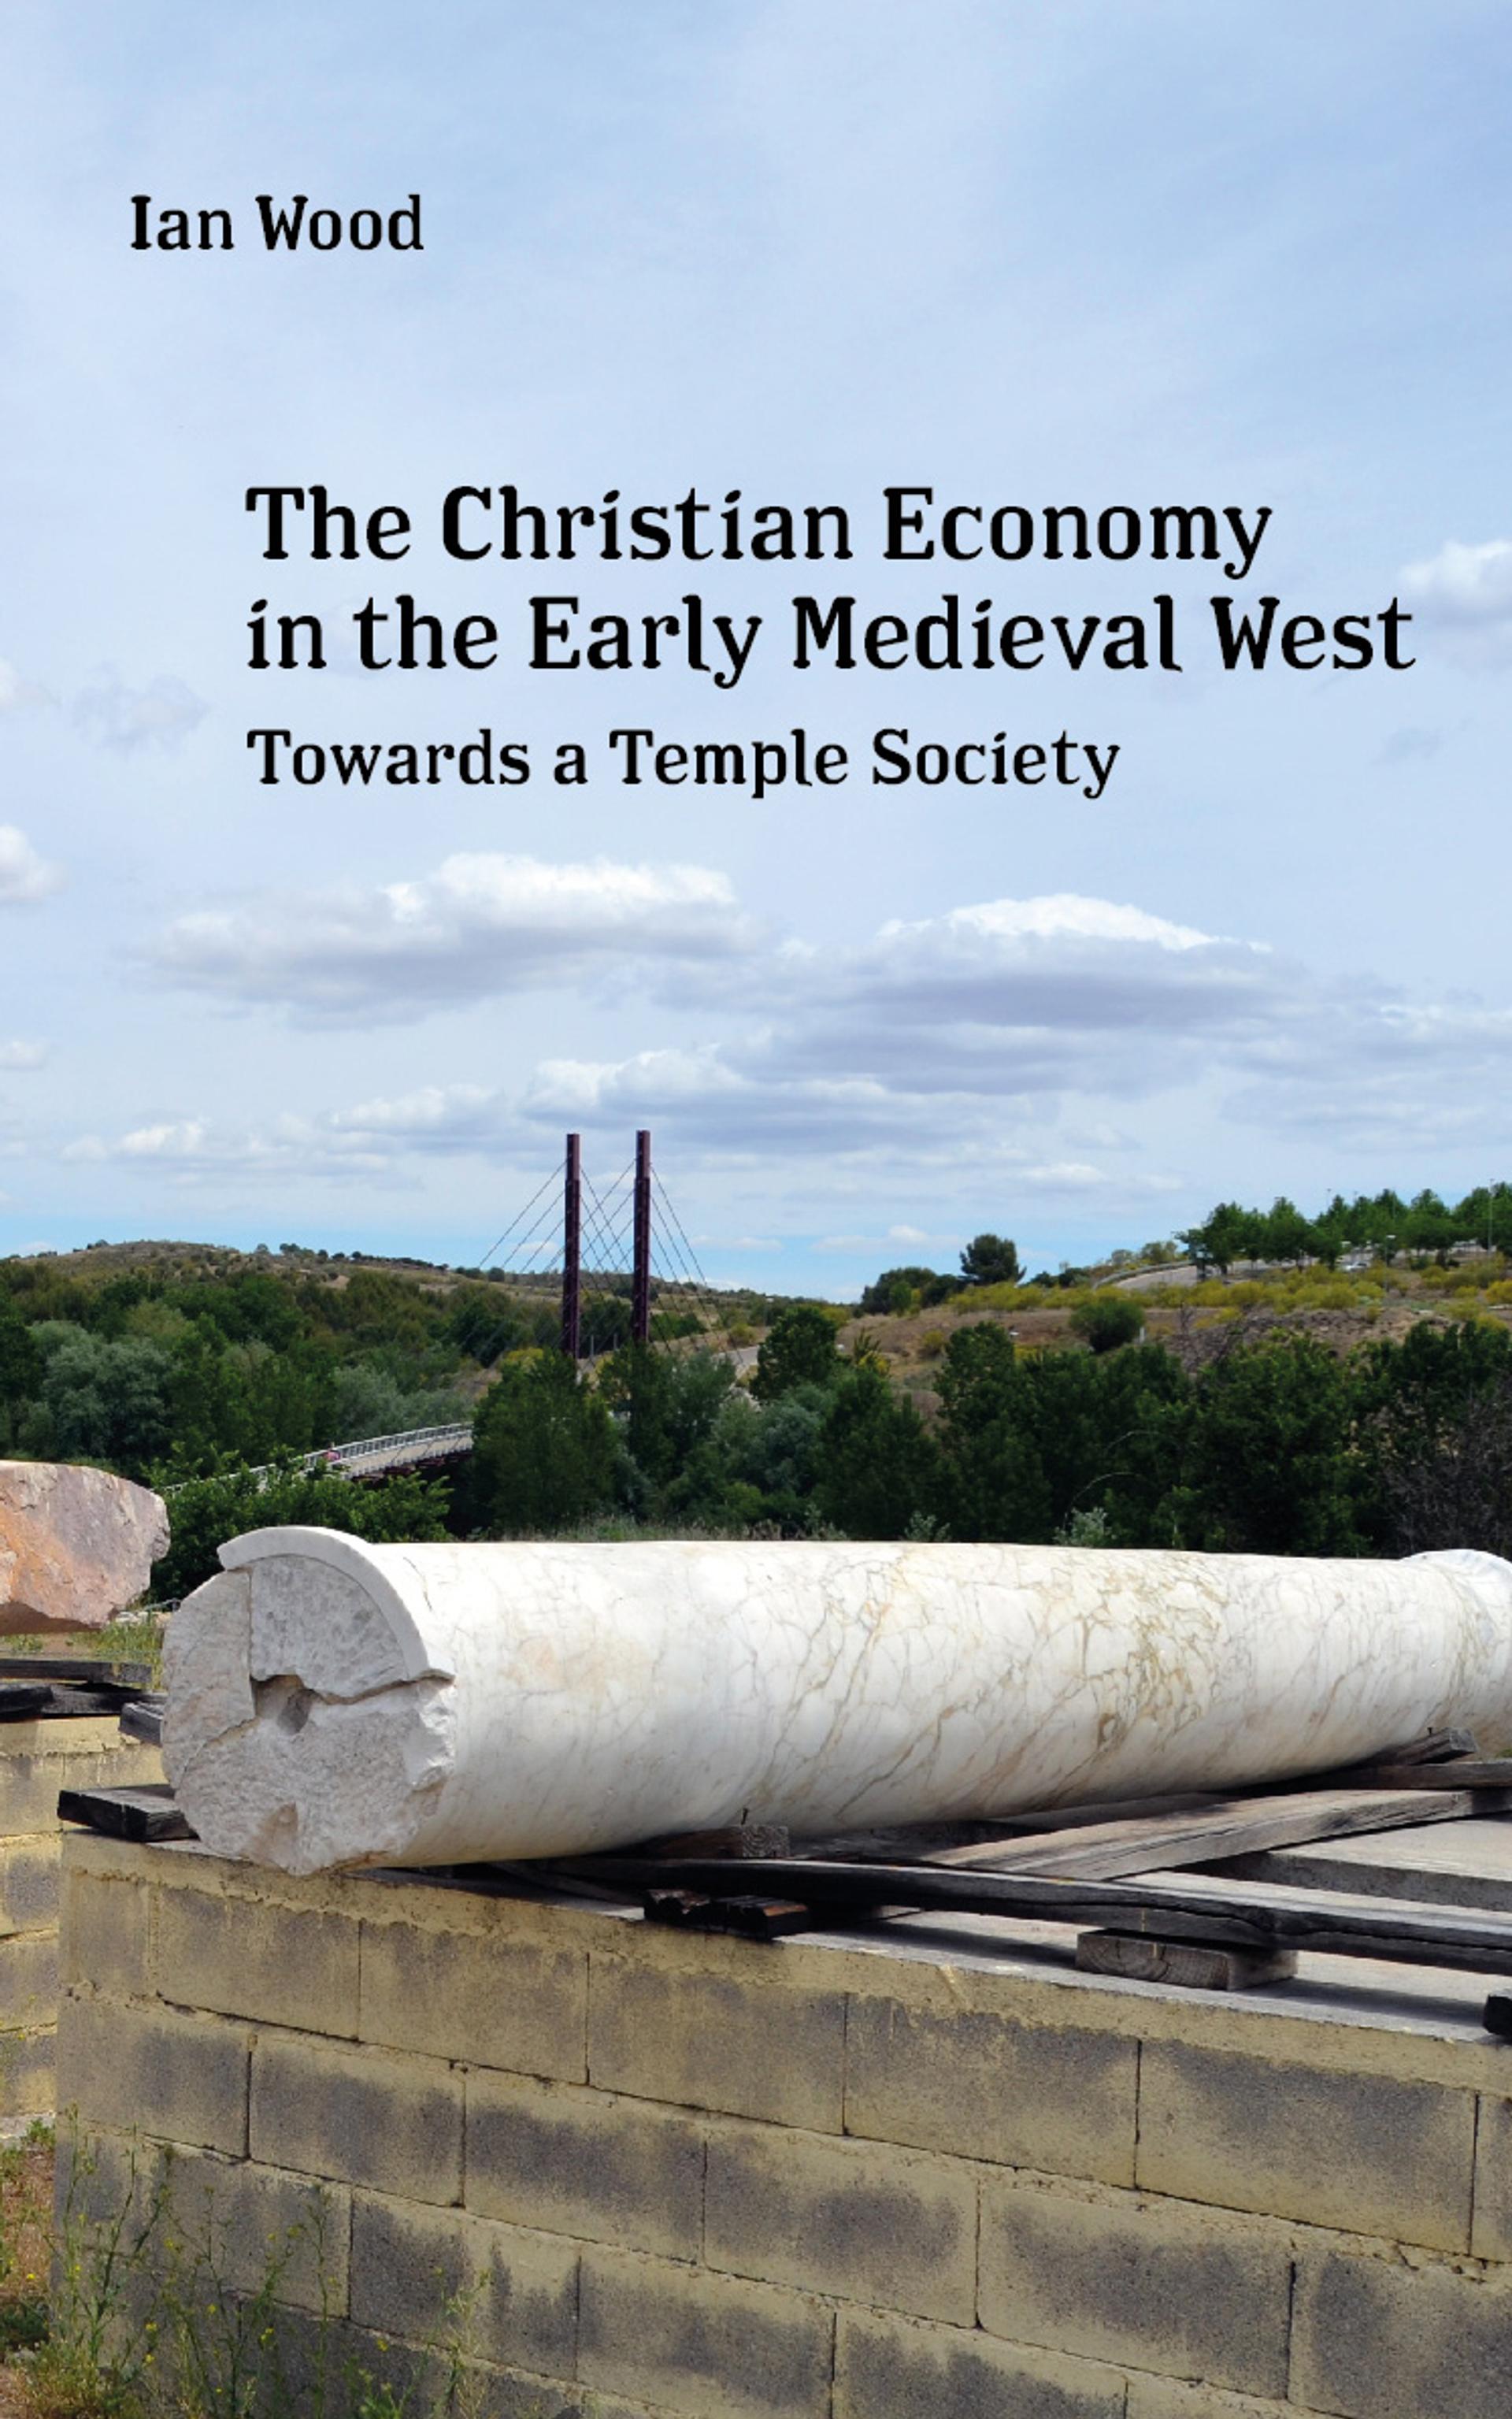 Cover of book titled The Christian Economy of the Early Medieval West: Towards a Temple Society